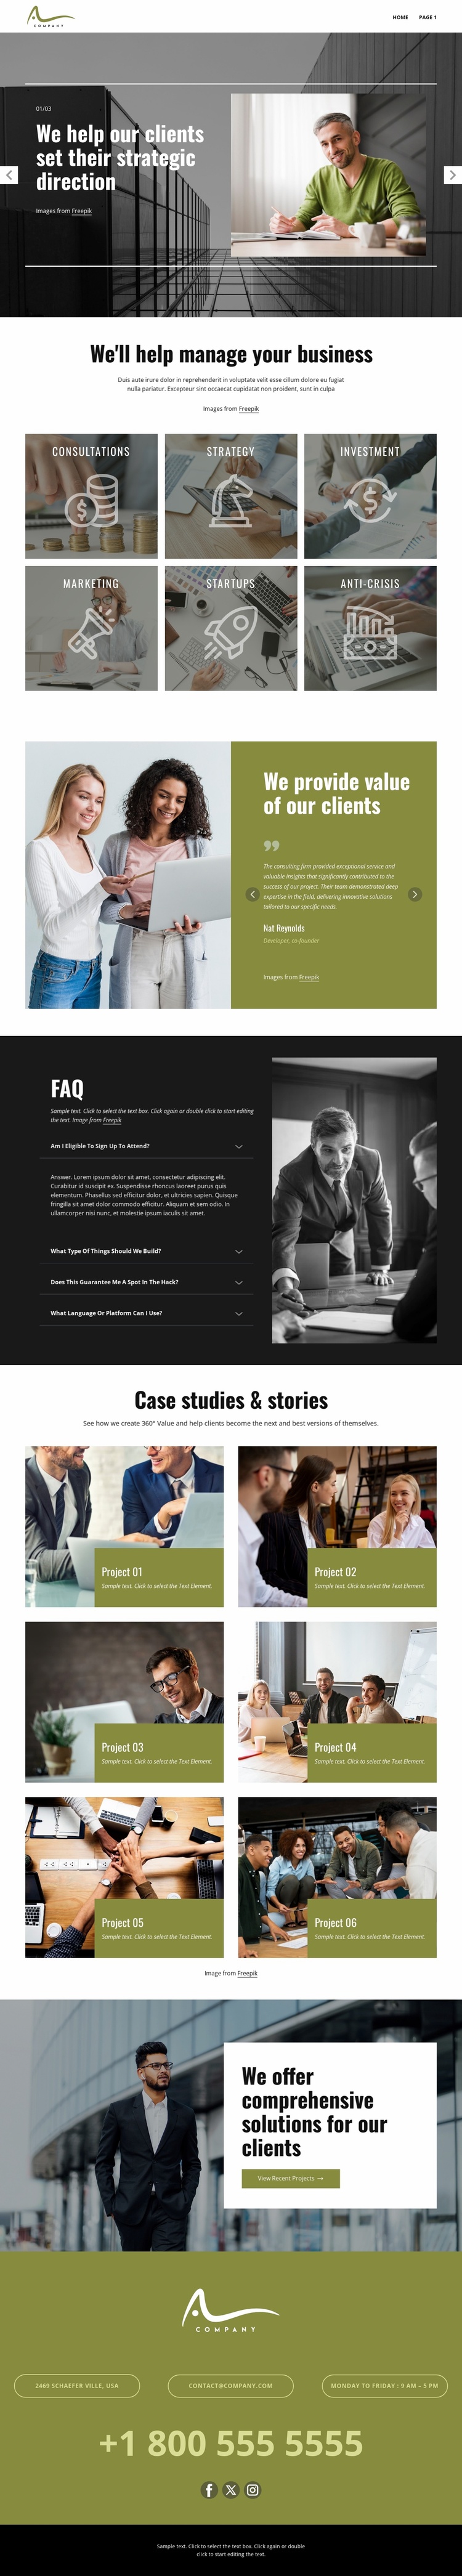 Strategic advice for growth Website Template